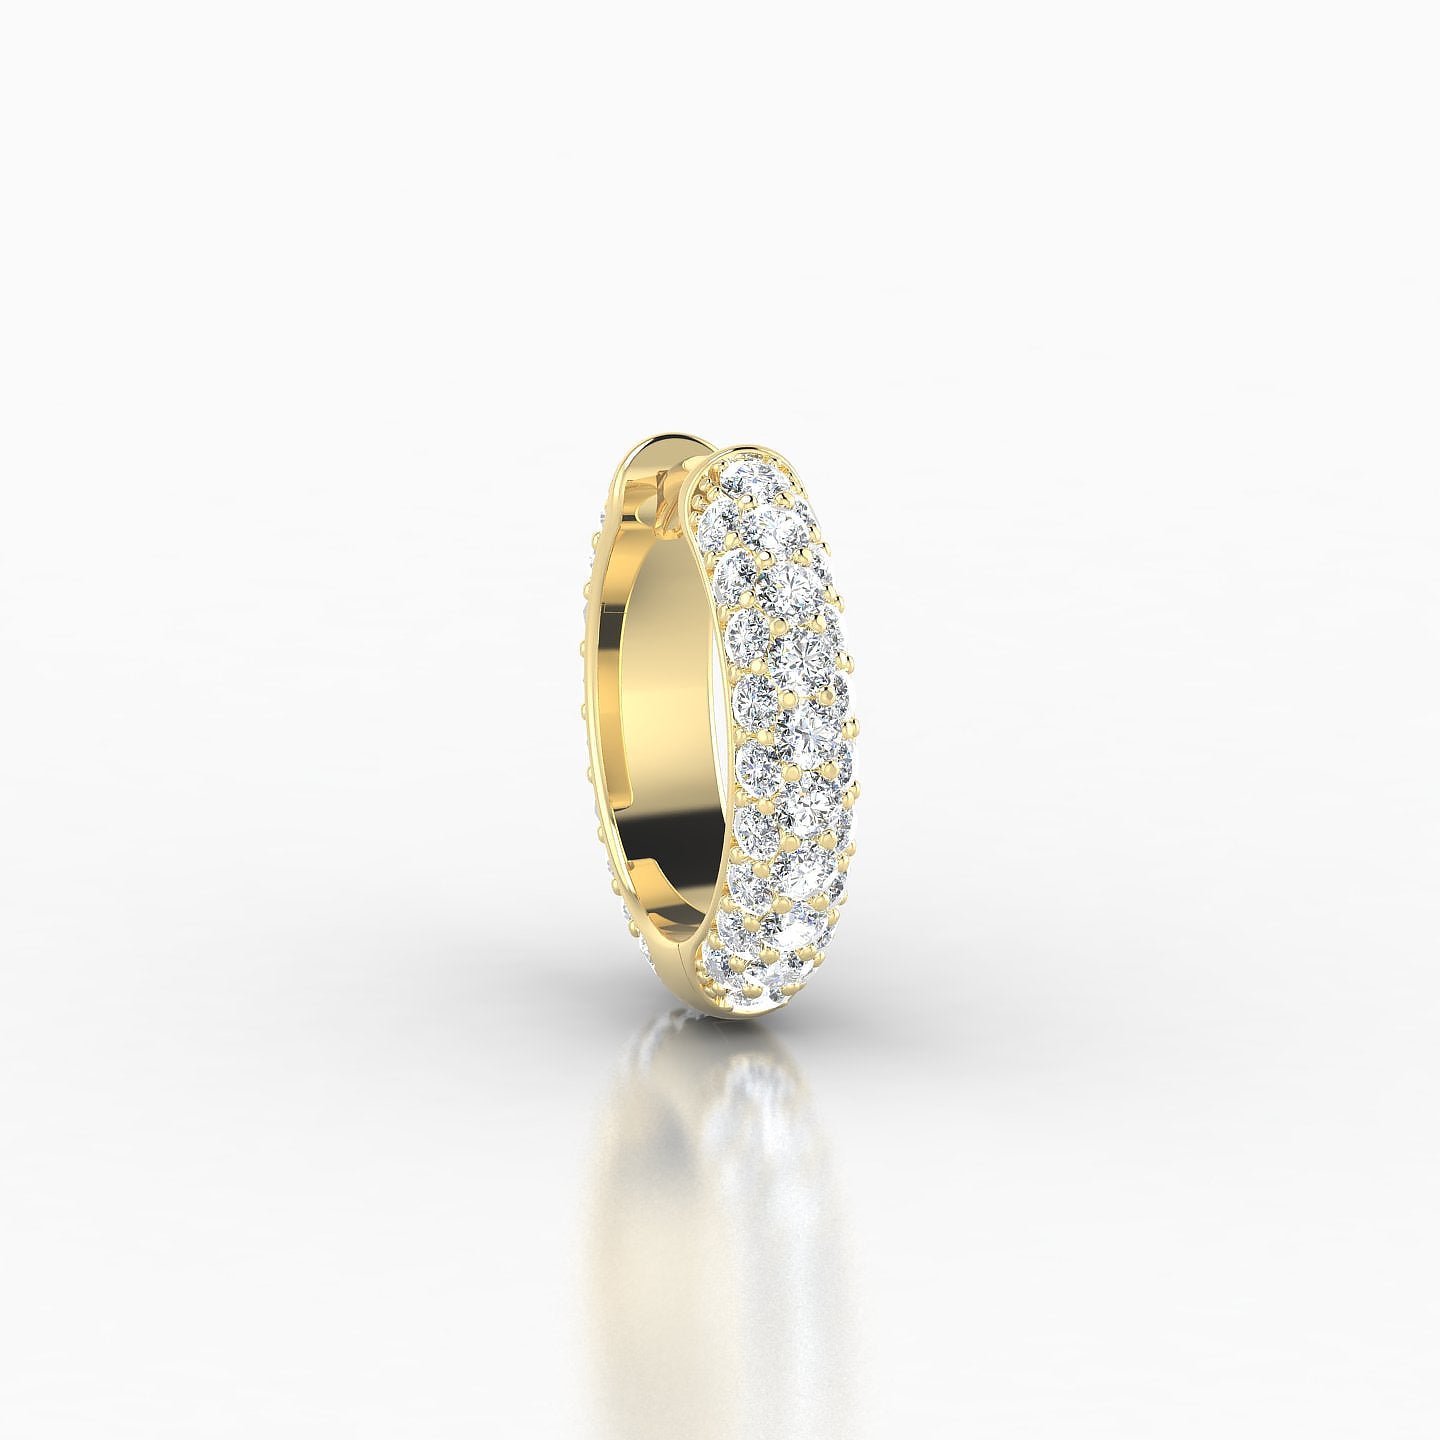 Theia | 18k Yellow Gold 8 mm Pave Diamond Nose Ring Piercing